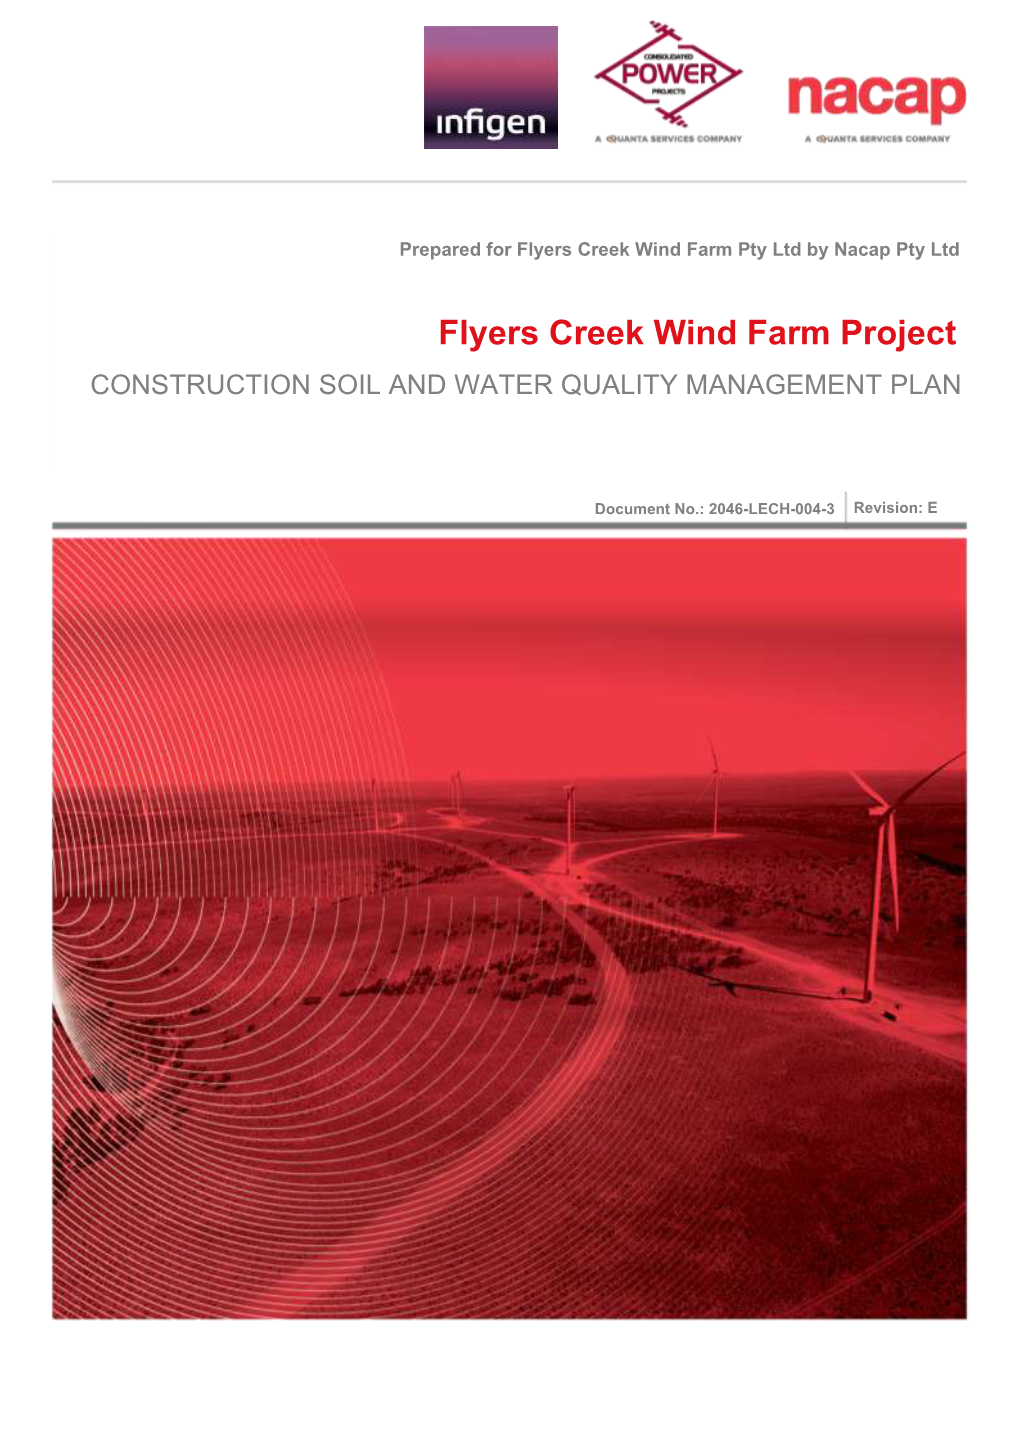 Flyers Creek Wind Farm Project CONSTRUCTION SOIL and WATER QUALITY MANAGEMENT PLAN